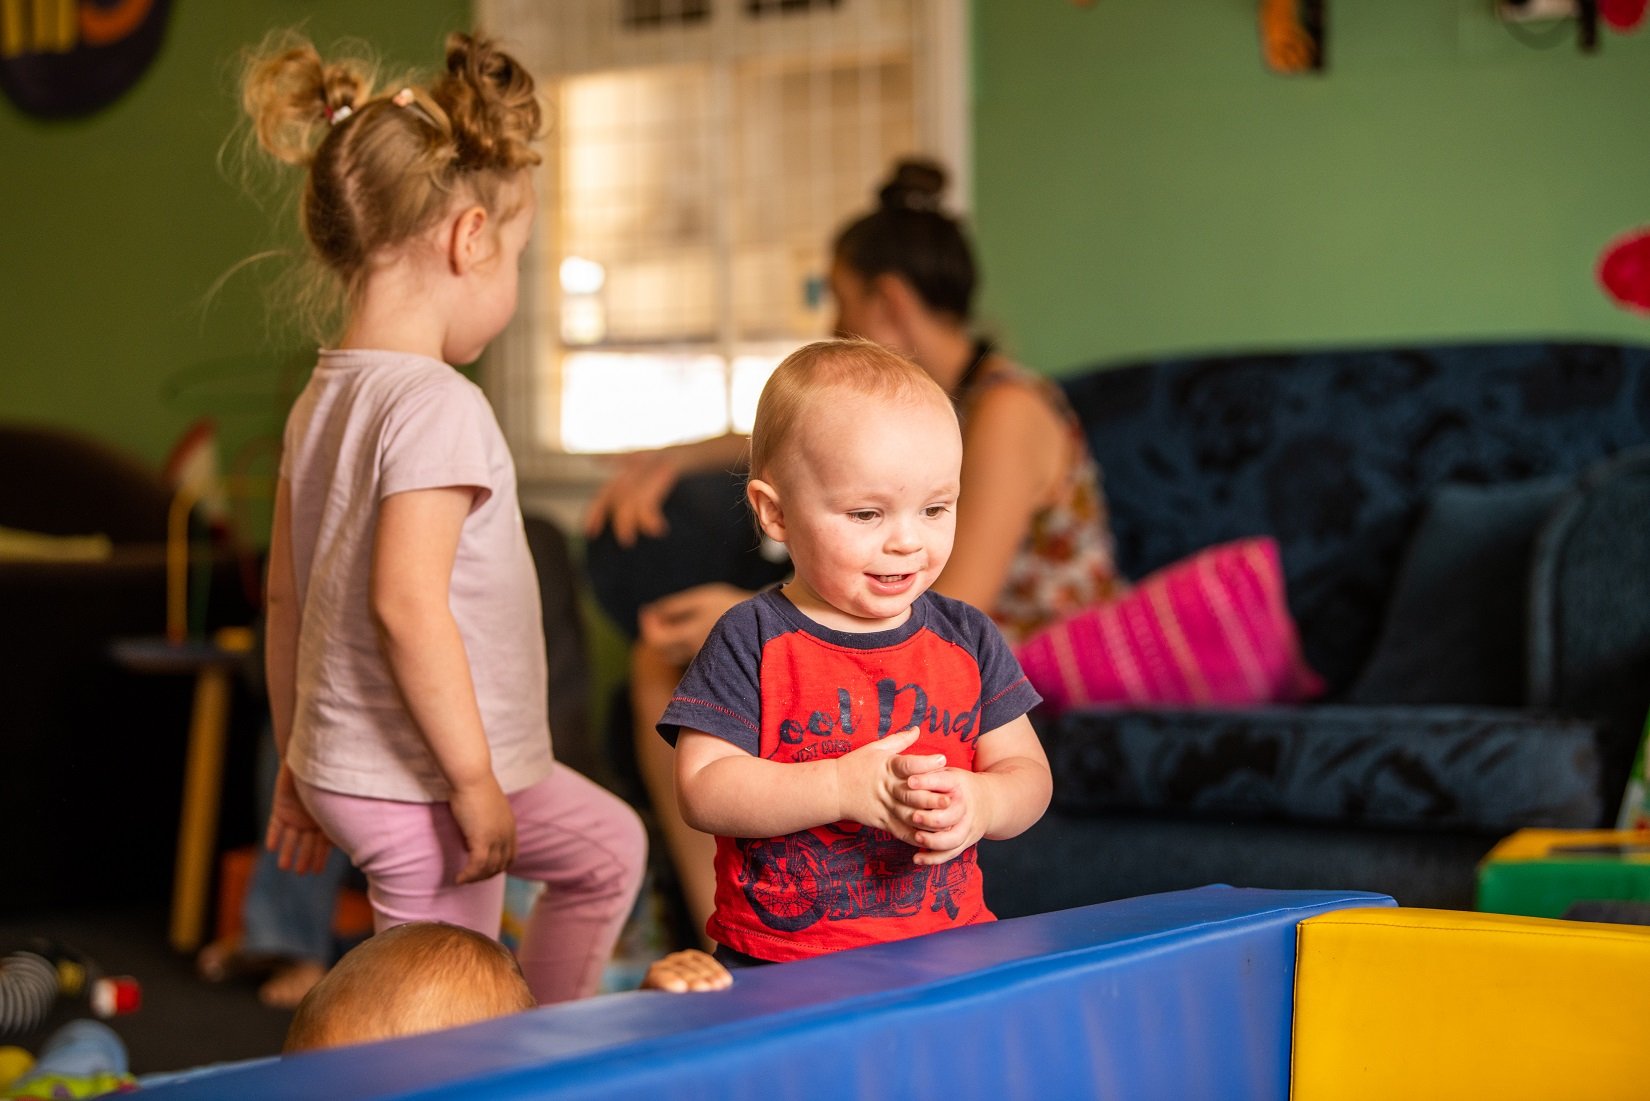 Child demonstrating onlooker play at a playgroup session